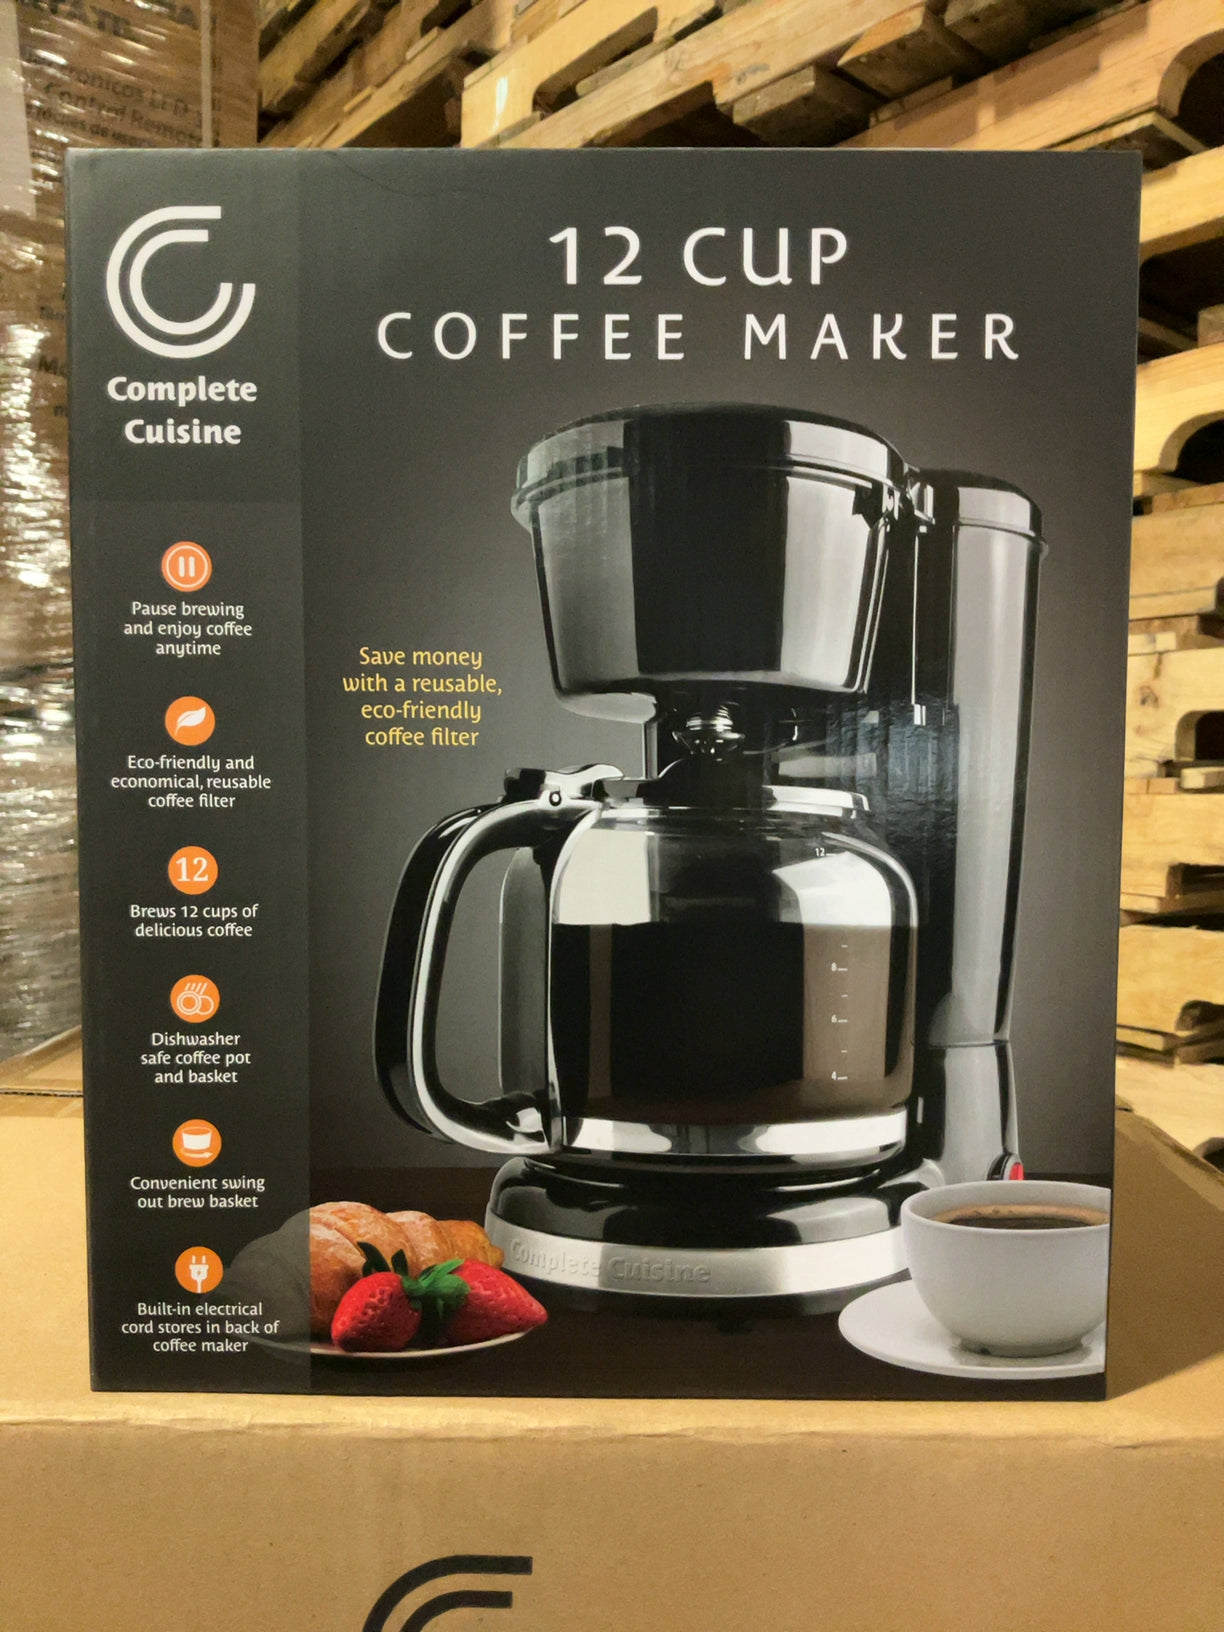 Complete Cuisine-12 Cup Coffee Maker With Reusable Filter, Black & Stainless Steel- ECO - Friendly Coffee Filter